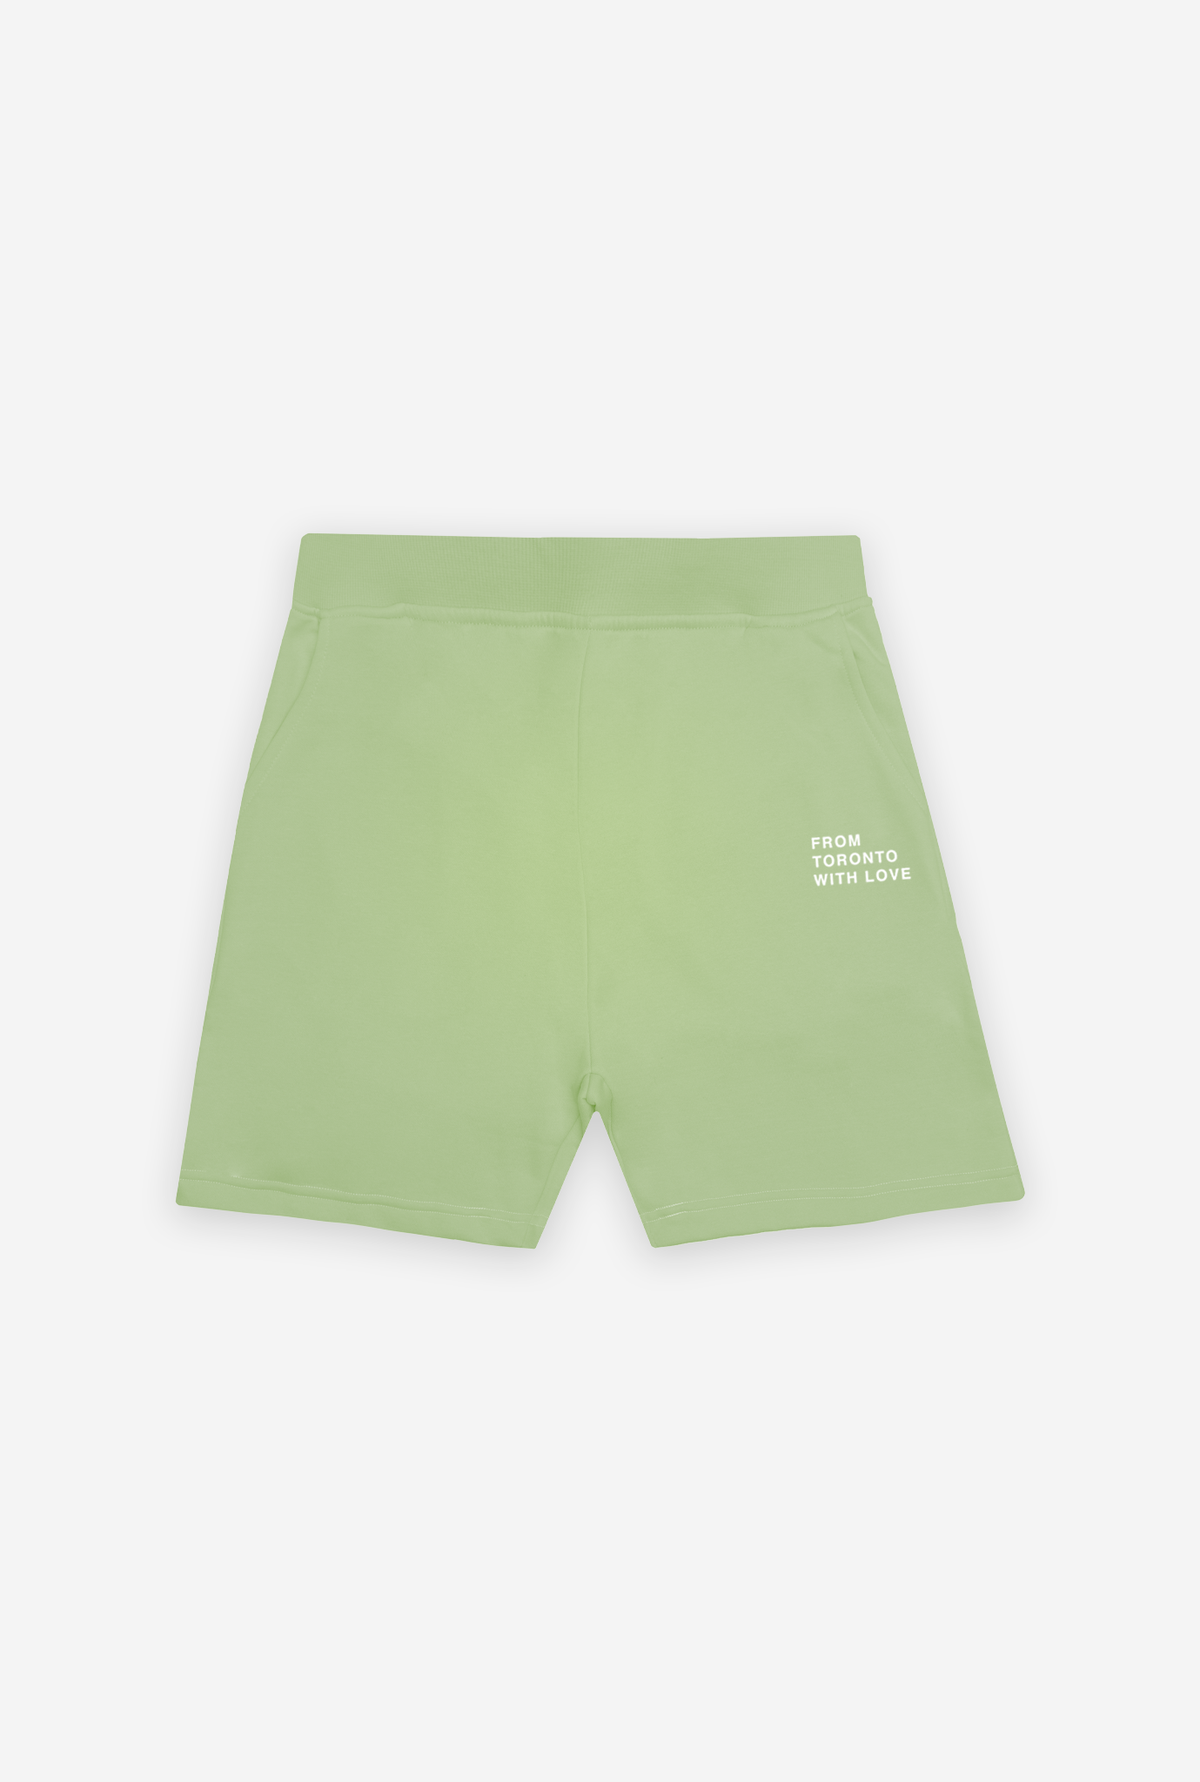 From Toronto with Love Fleece Shorts - Pastel Sage